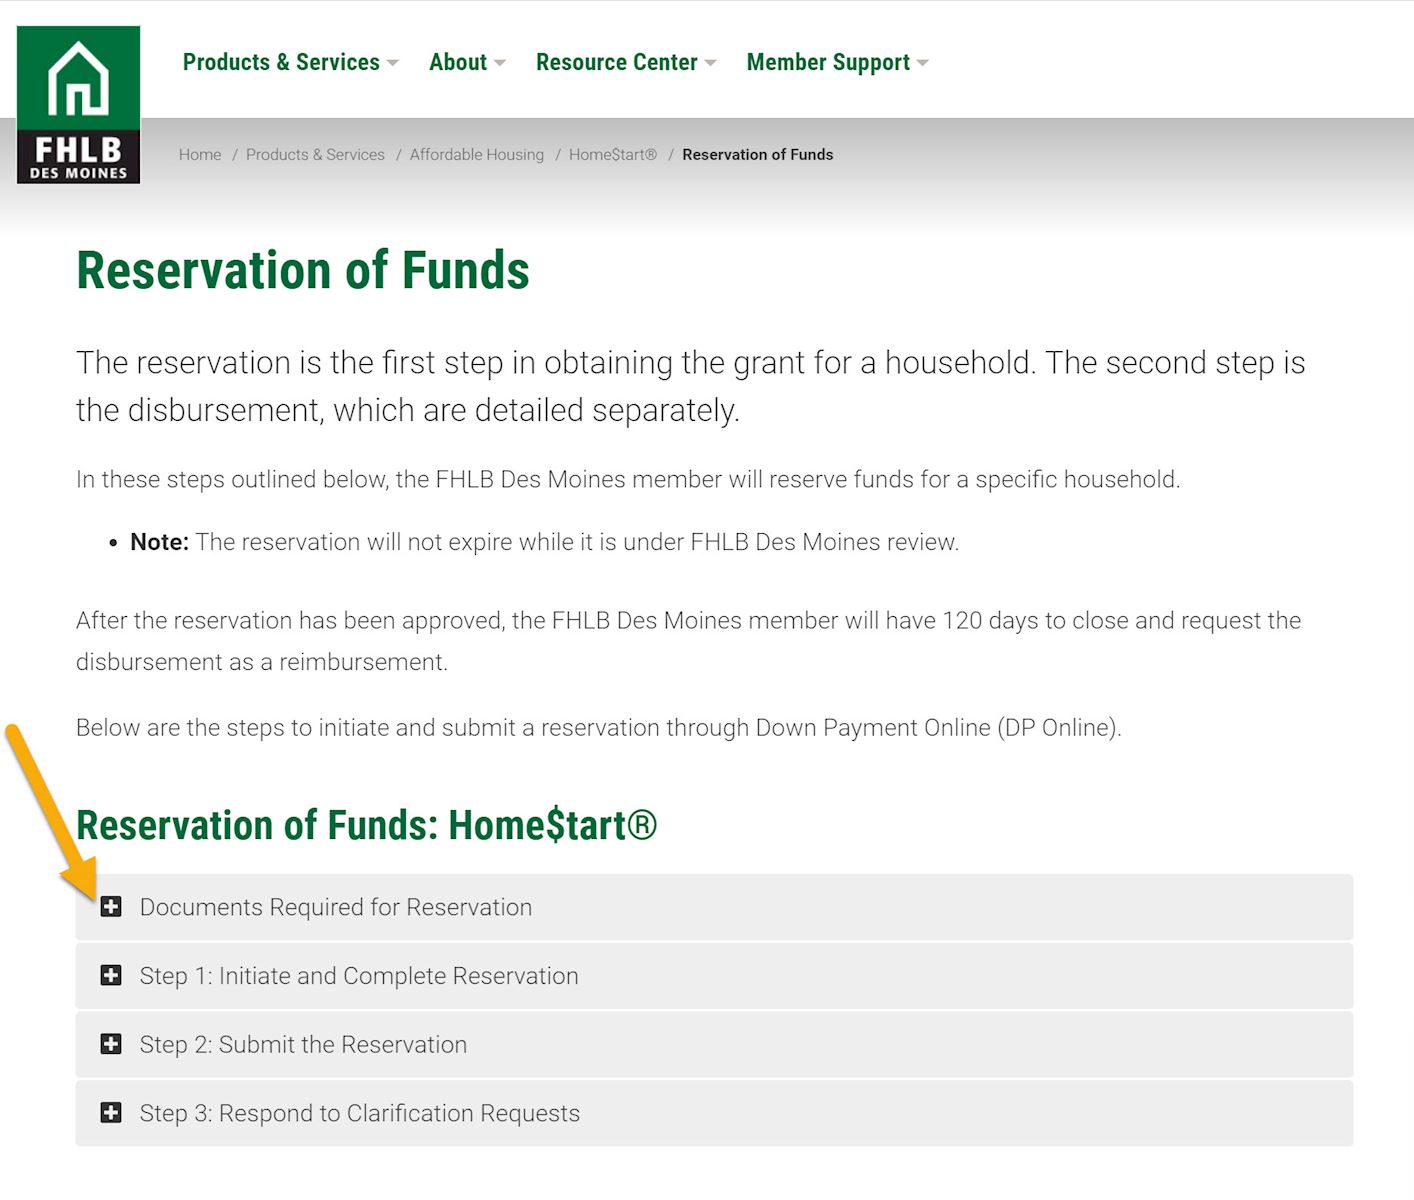 Reservation of Funds